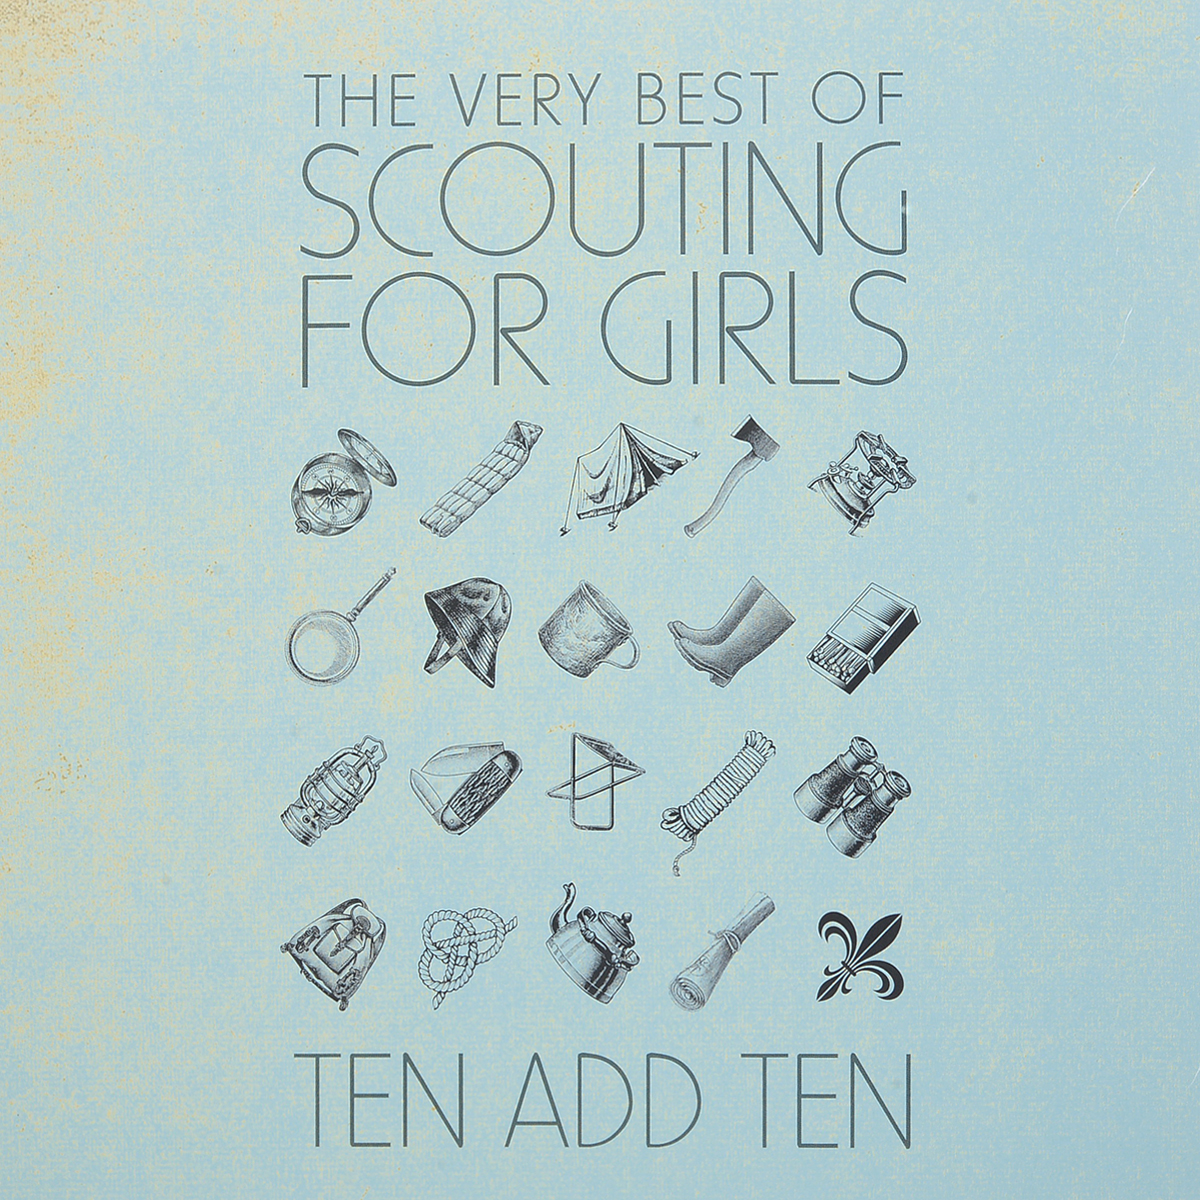 Scouting For Girls. Ten Add Ten: The Very Best Of Scouting For Girls (2 LP)